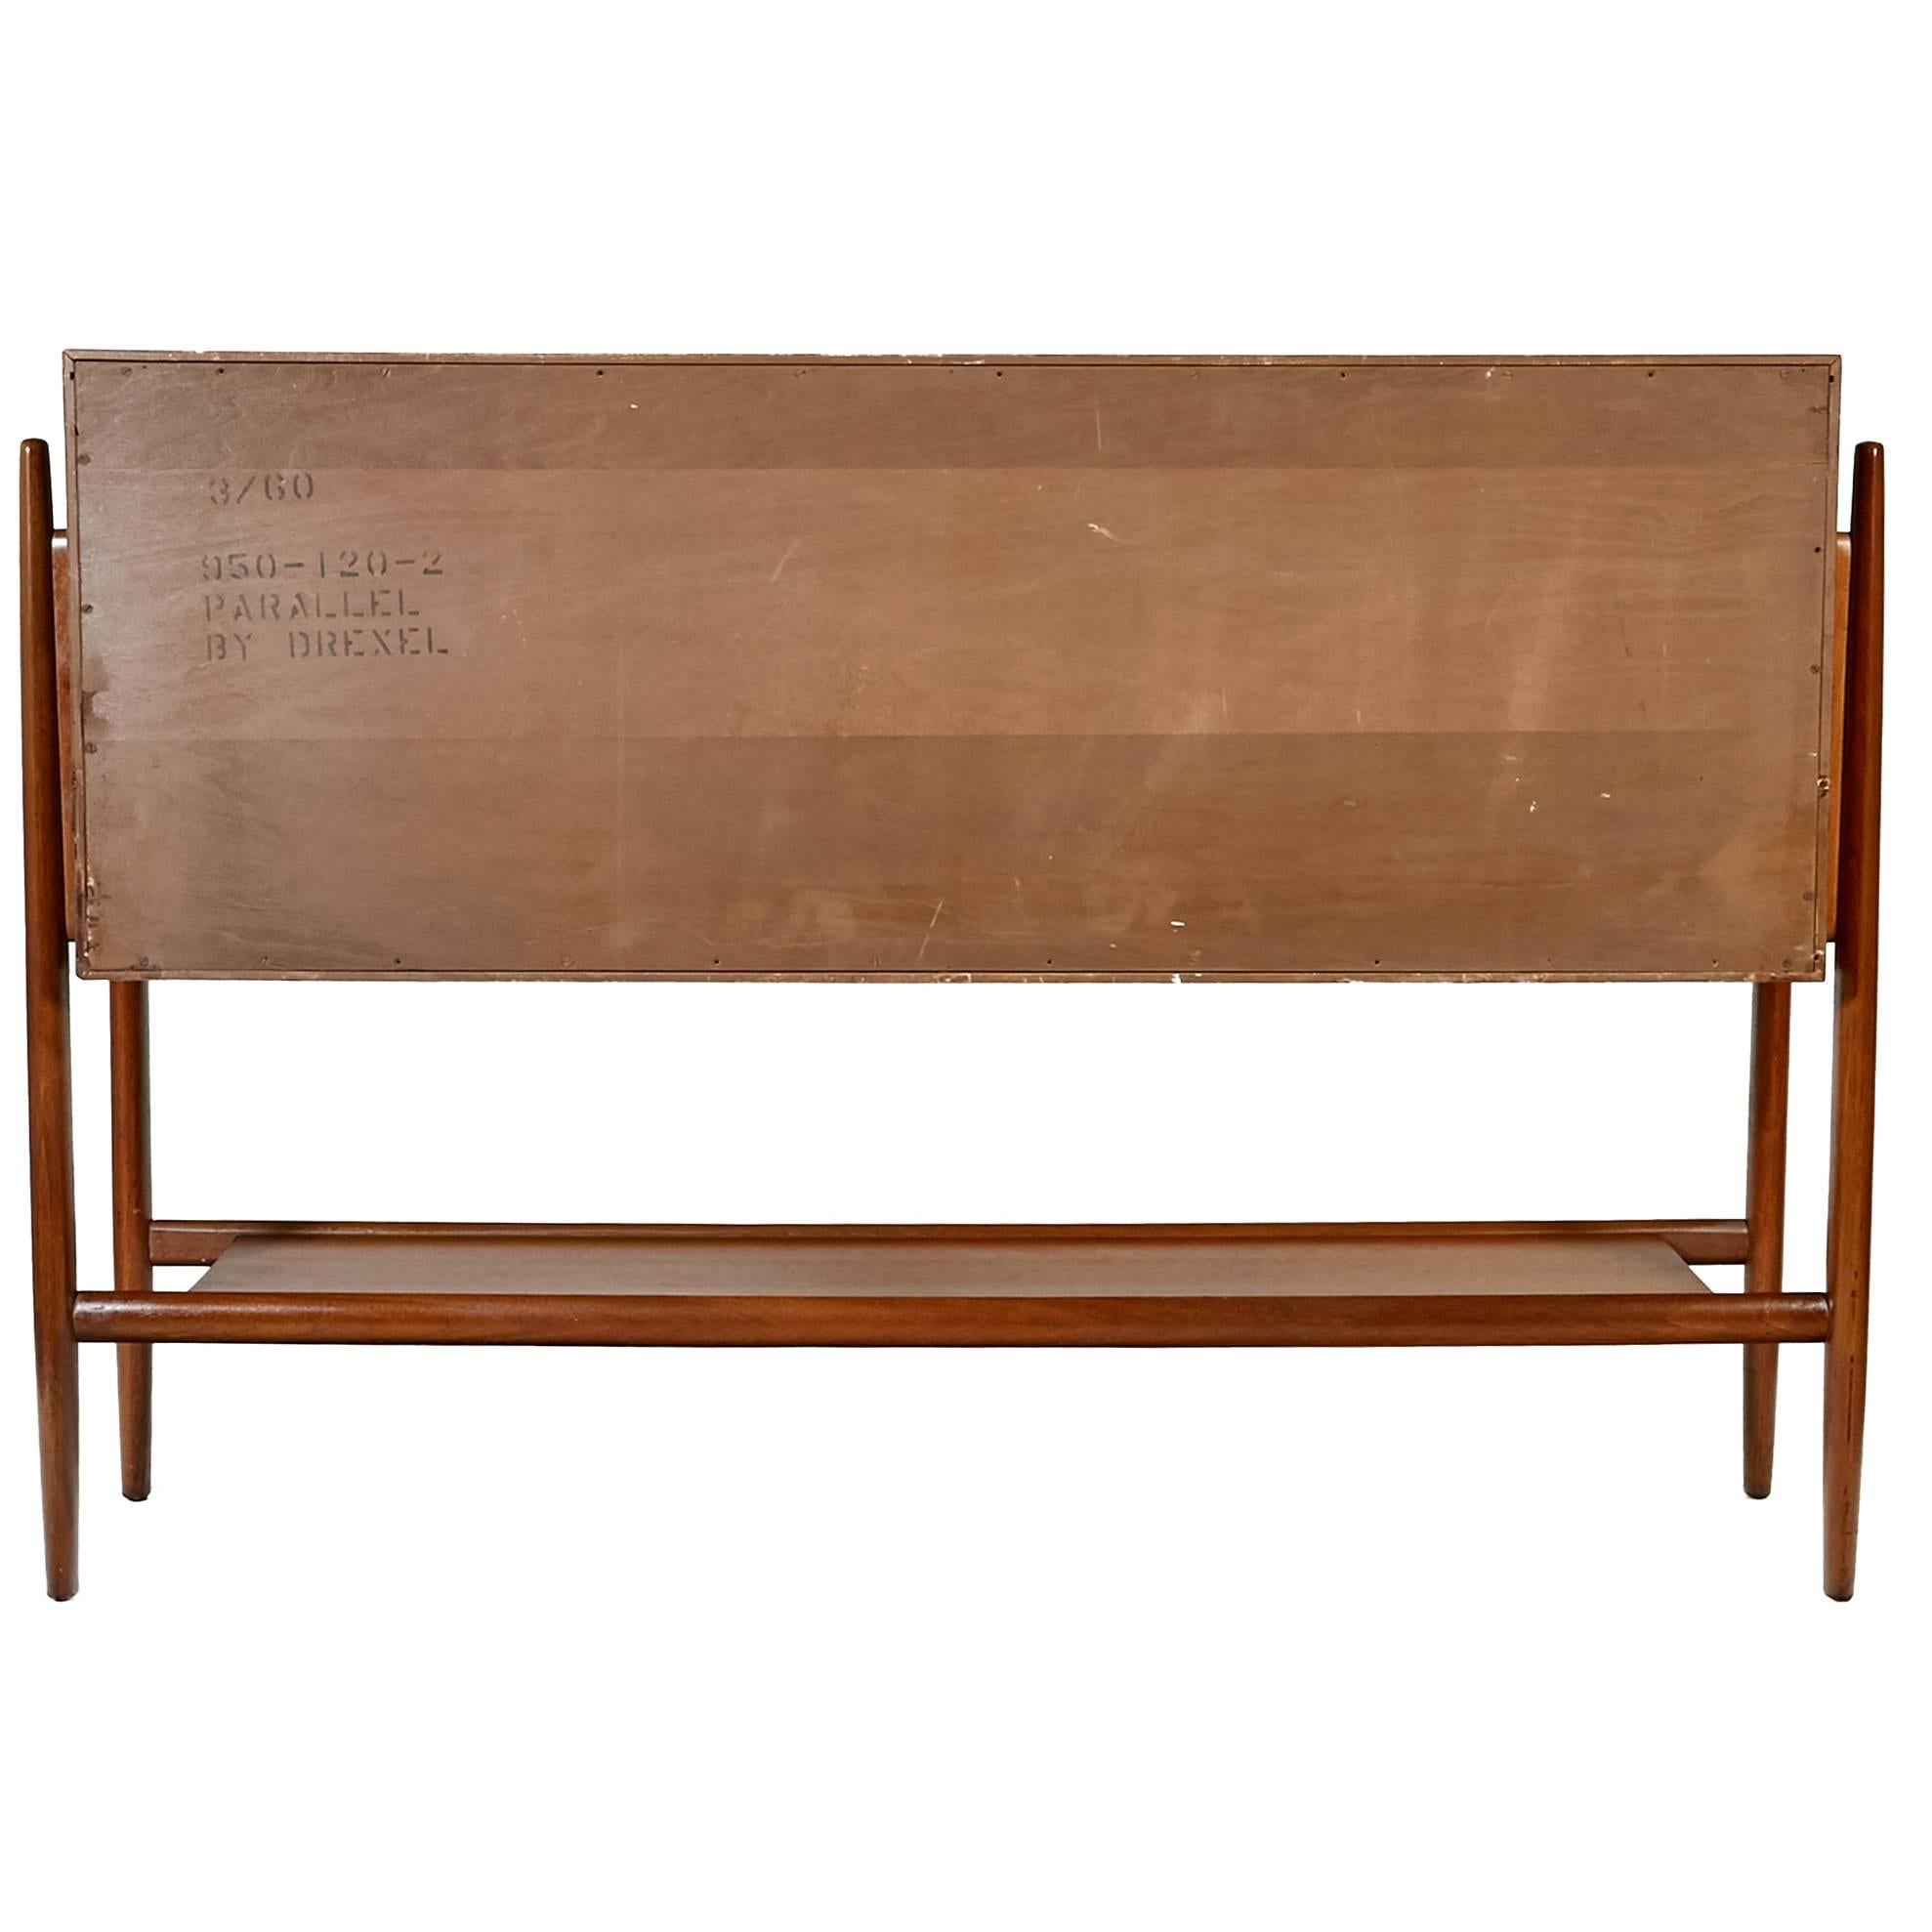 Walnut tambour door credenza designed by Barney Flagg for the Drexel Furniture 